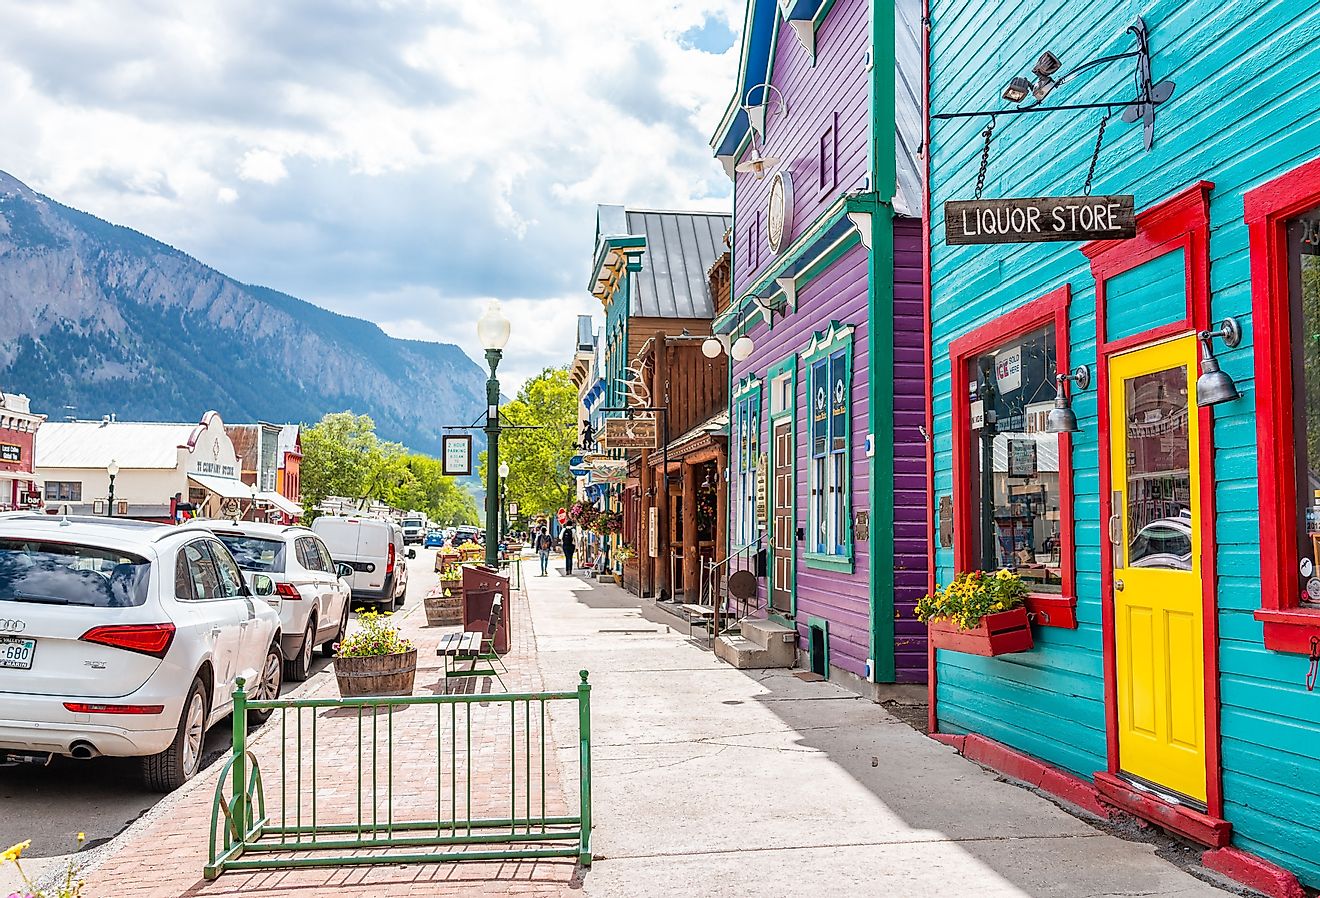 Colorful vivid village houses and downtown street in summer in Crested Butte, Colorado. Image credit Kristi Blokhin via Shutterstock